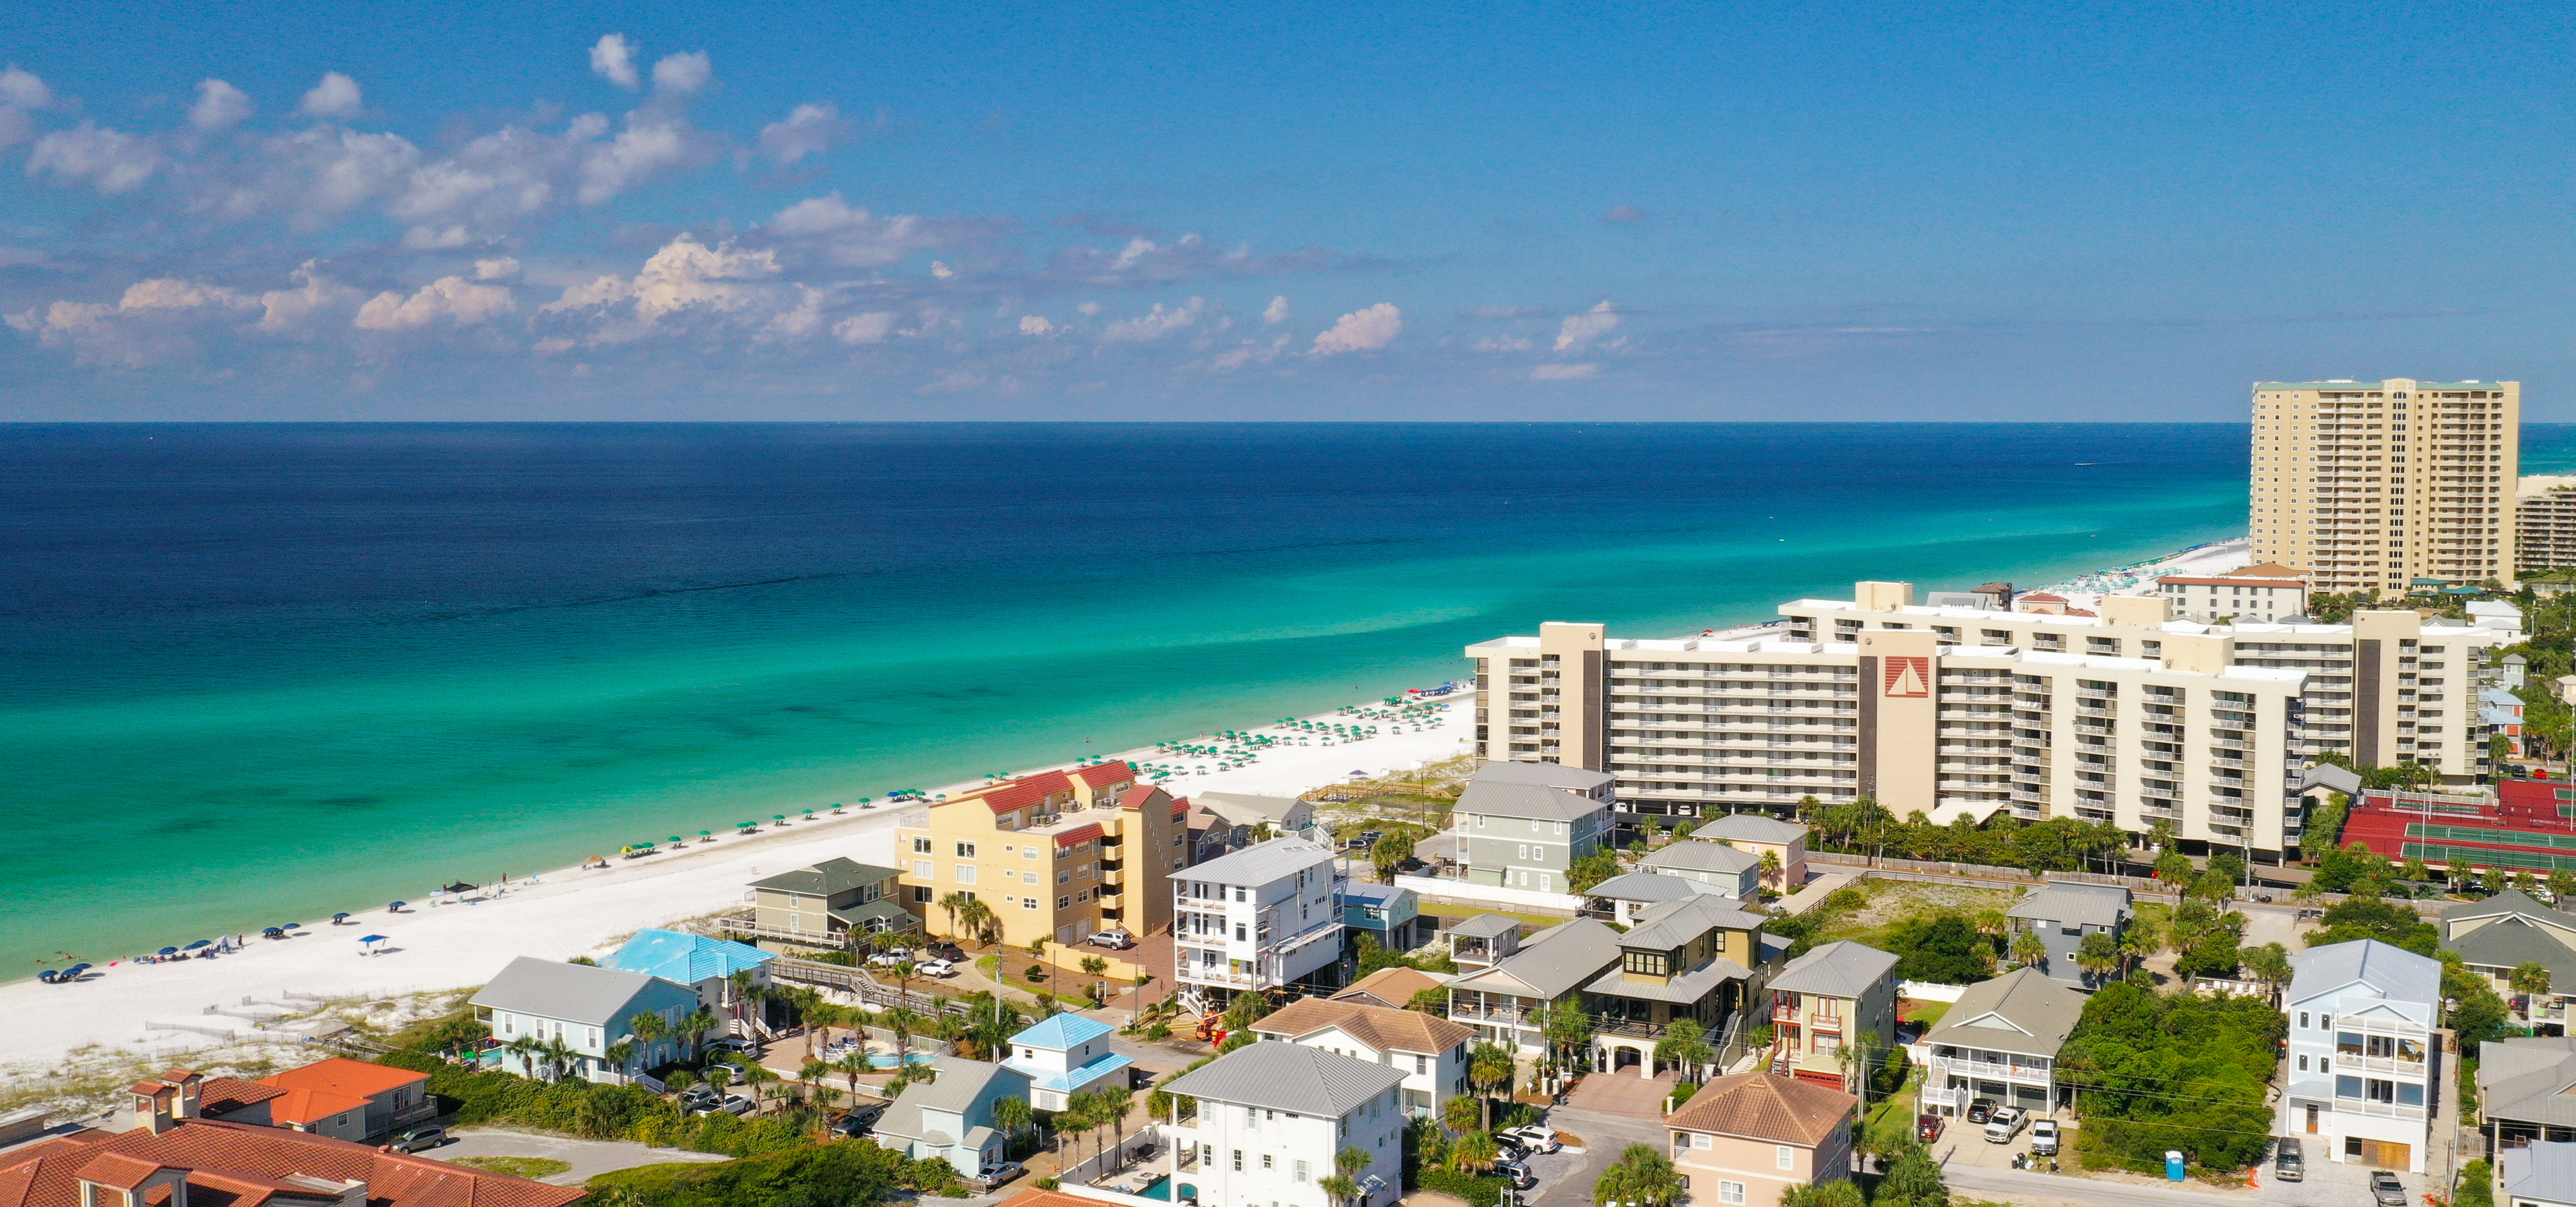 An aerial view of condos along the beach in Miramar Beach parallel to turquoise blue gulf waters